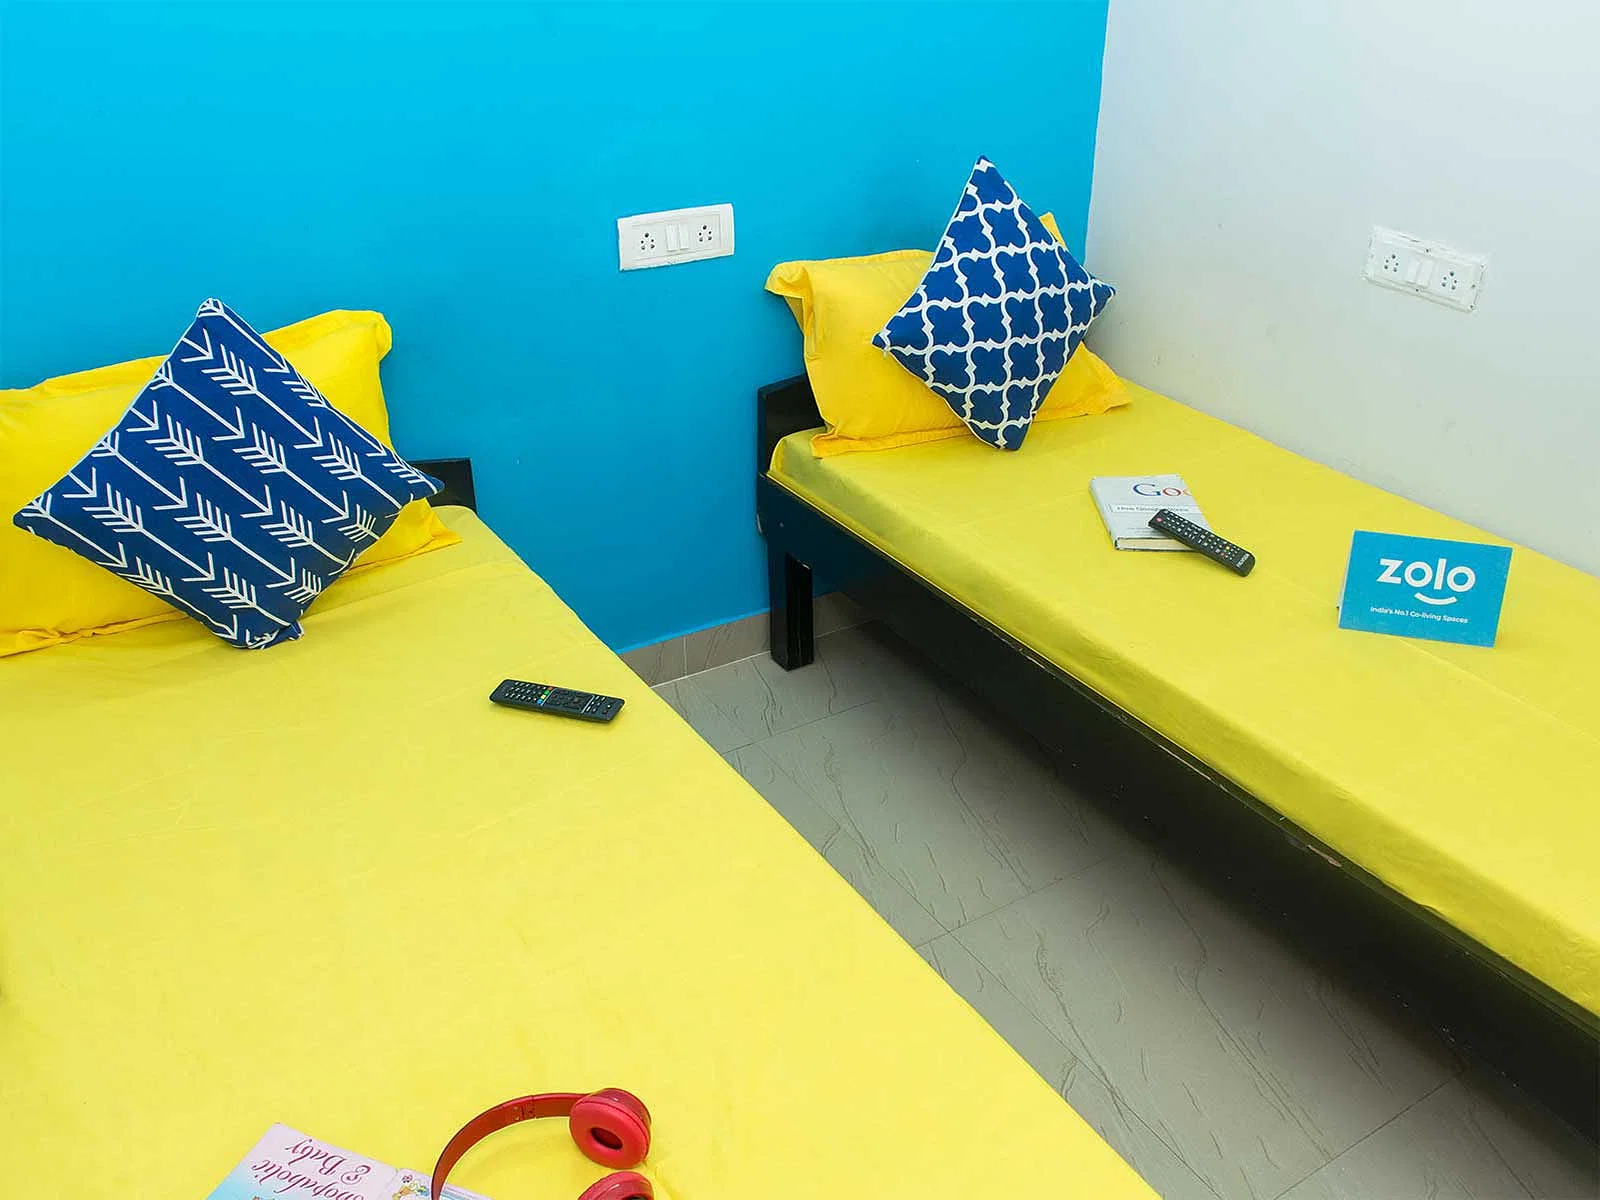 best Coliving rooms with high-speed Wi-Fi, shared kitchens, and laundry facilities-Zolo Barton